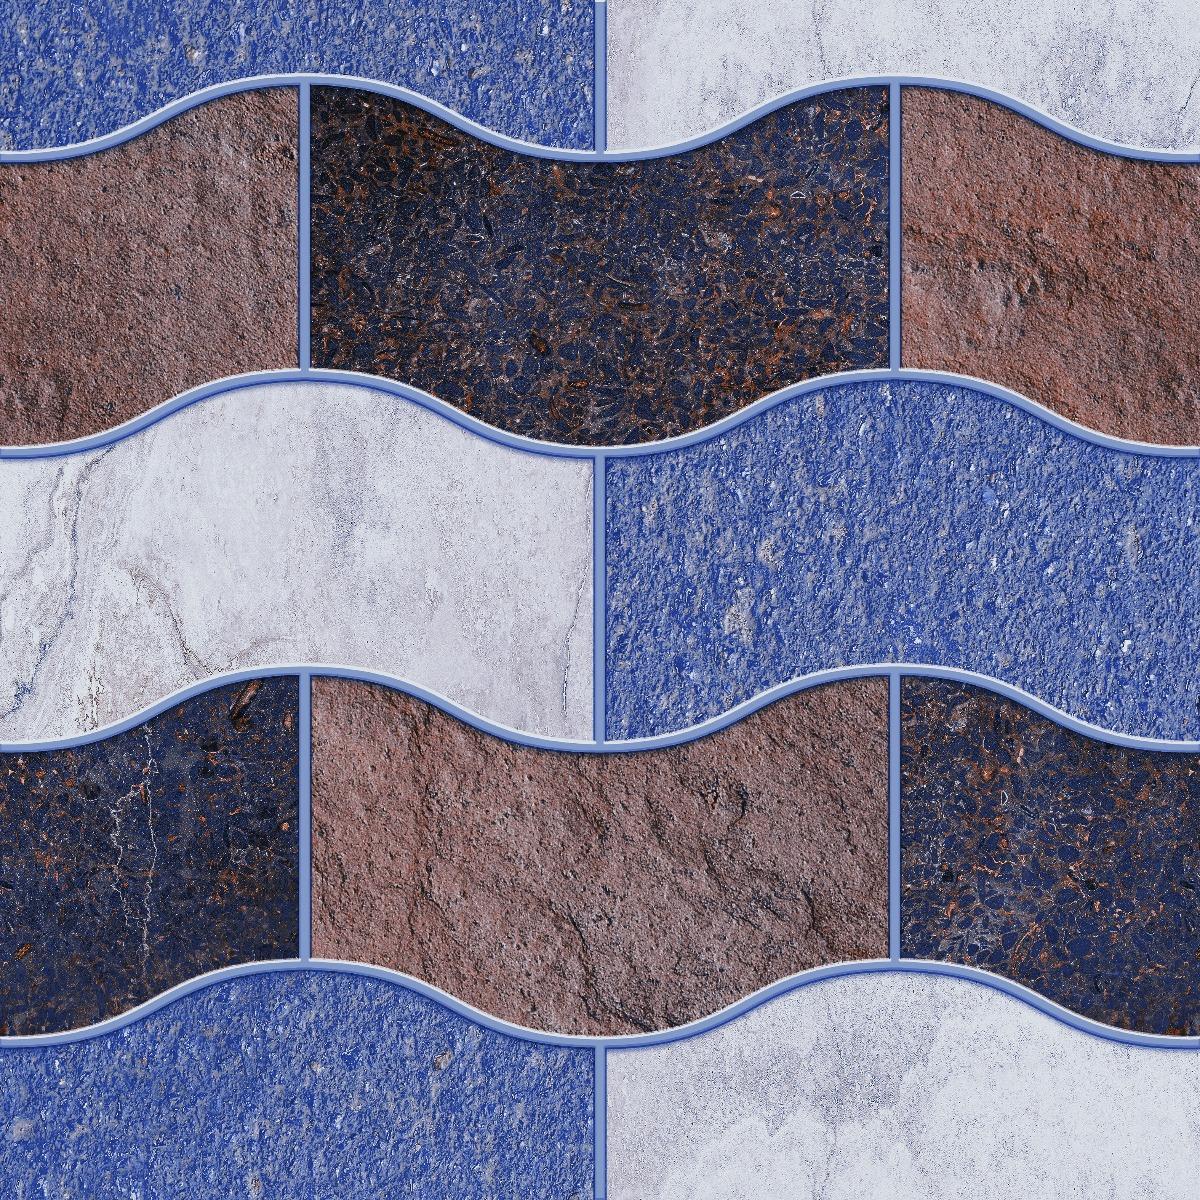 Pattern Tiles for Balcony Tiles, Swimming Pool Tiles, Parking Tiles, Pathway Tiles, Commercial/Office, Outdoor Area